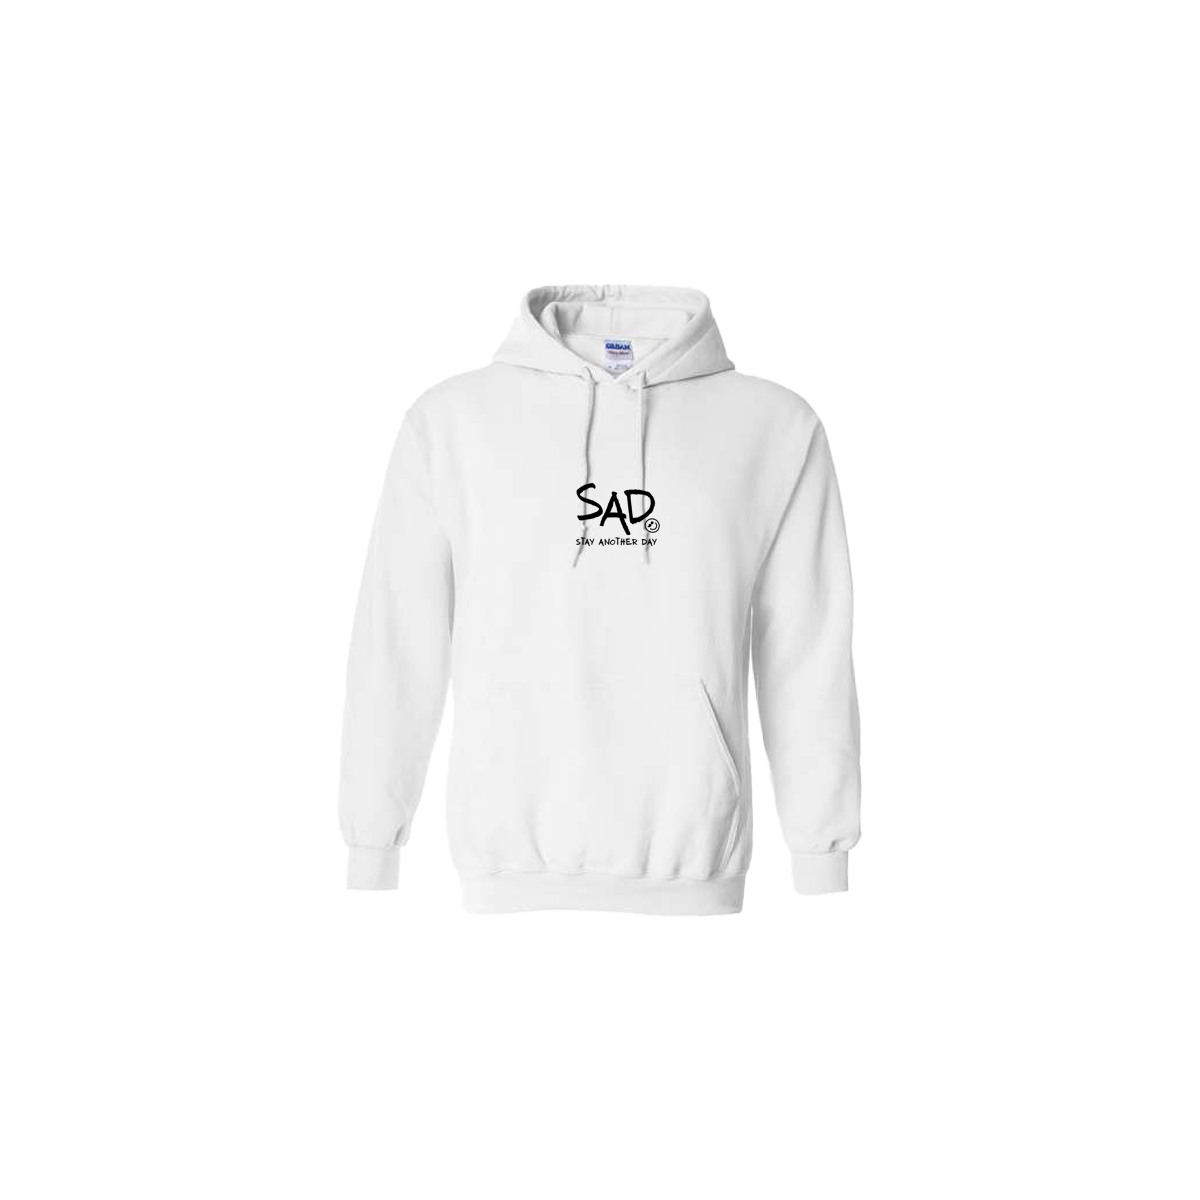 Stay Another Day - SAD Logo Embroidered White Hoodie - Mental Health Awareness Clothing